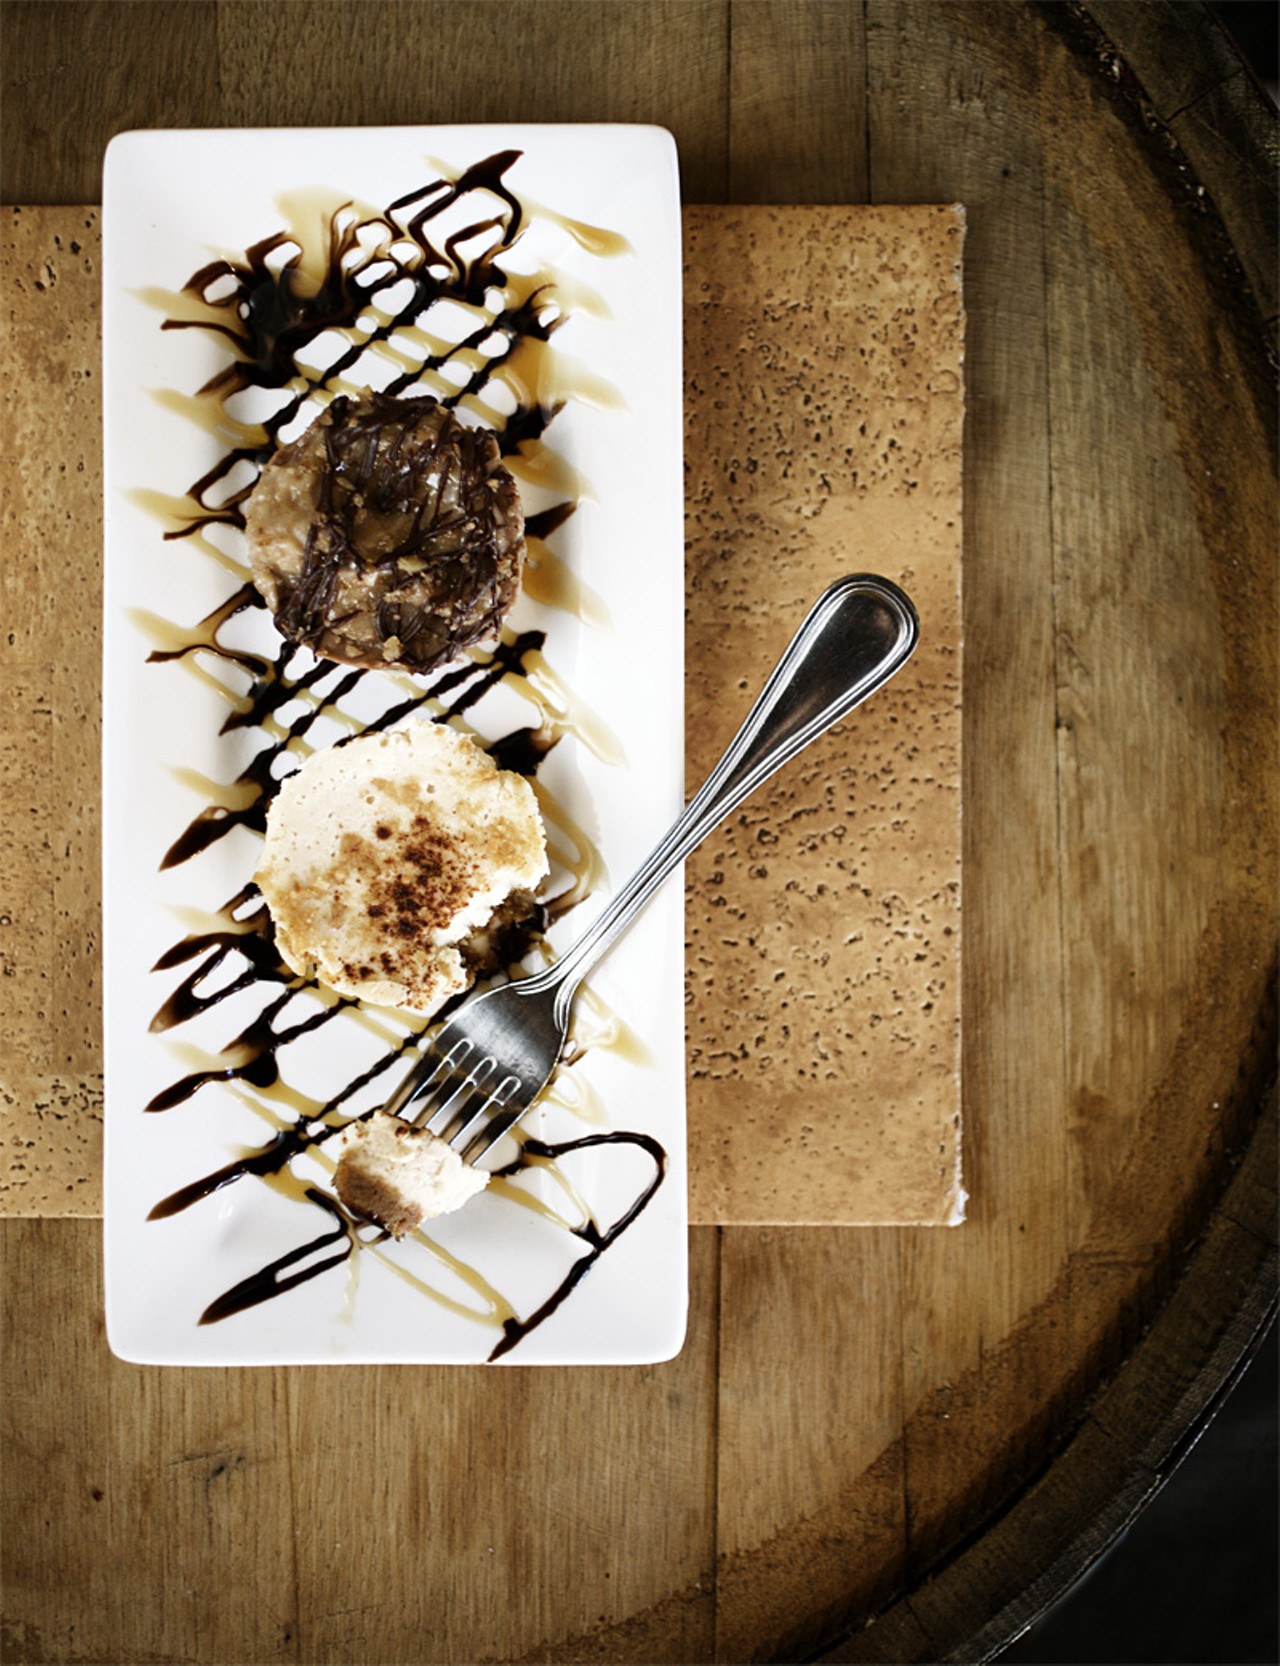 Weekly cheesecake specials are offered at One19 North. Last week we found the chocolate caramel and the banana cheesecake both made by Zeke Knight.